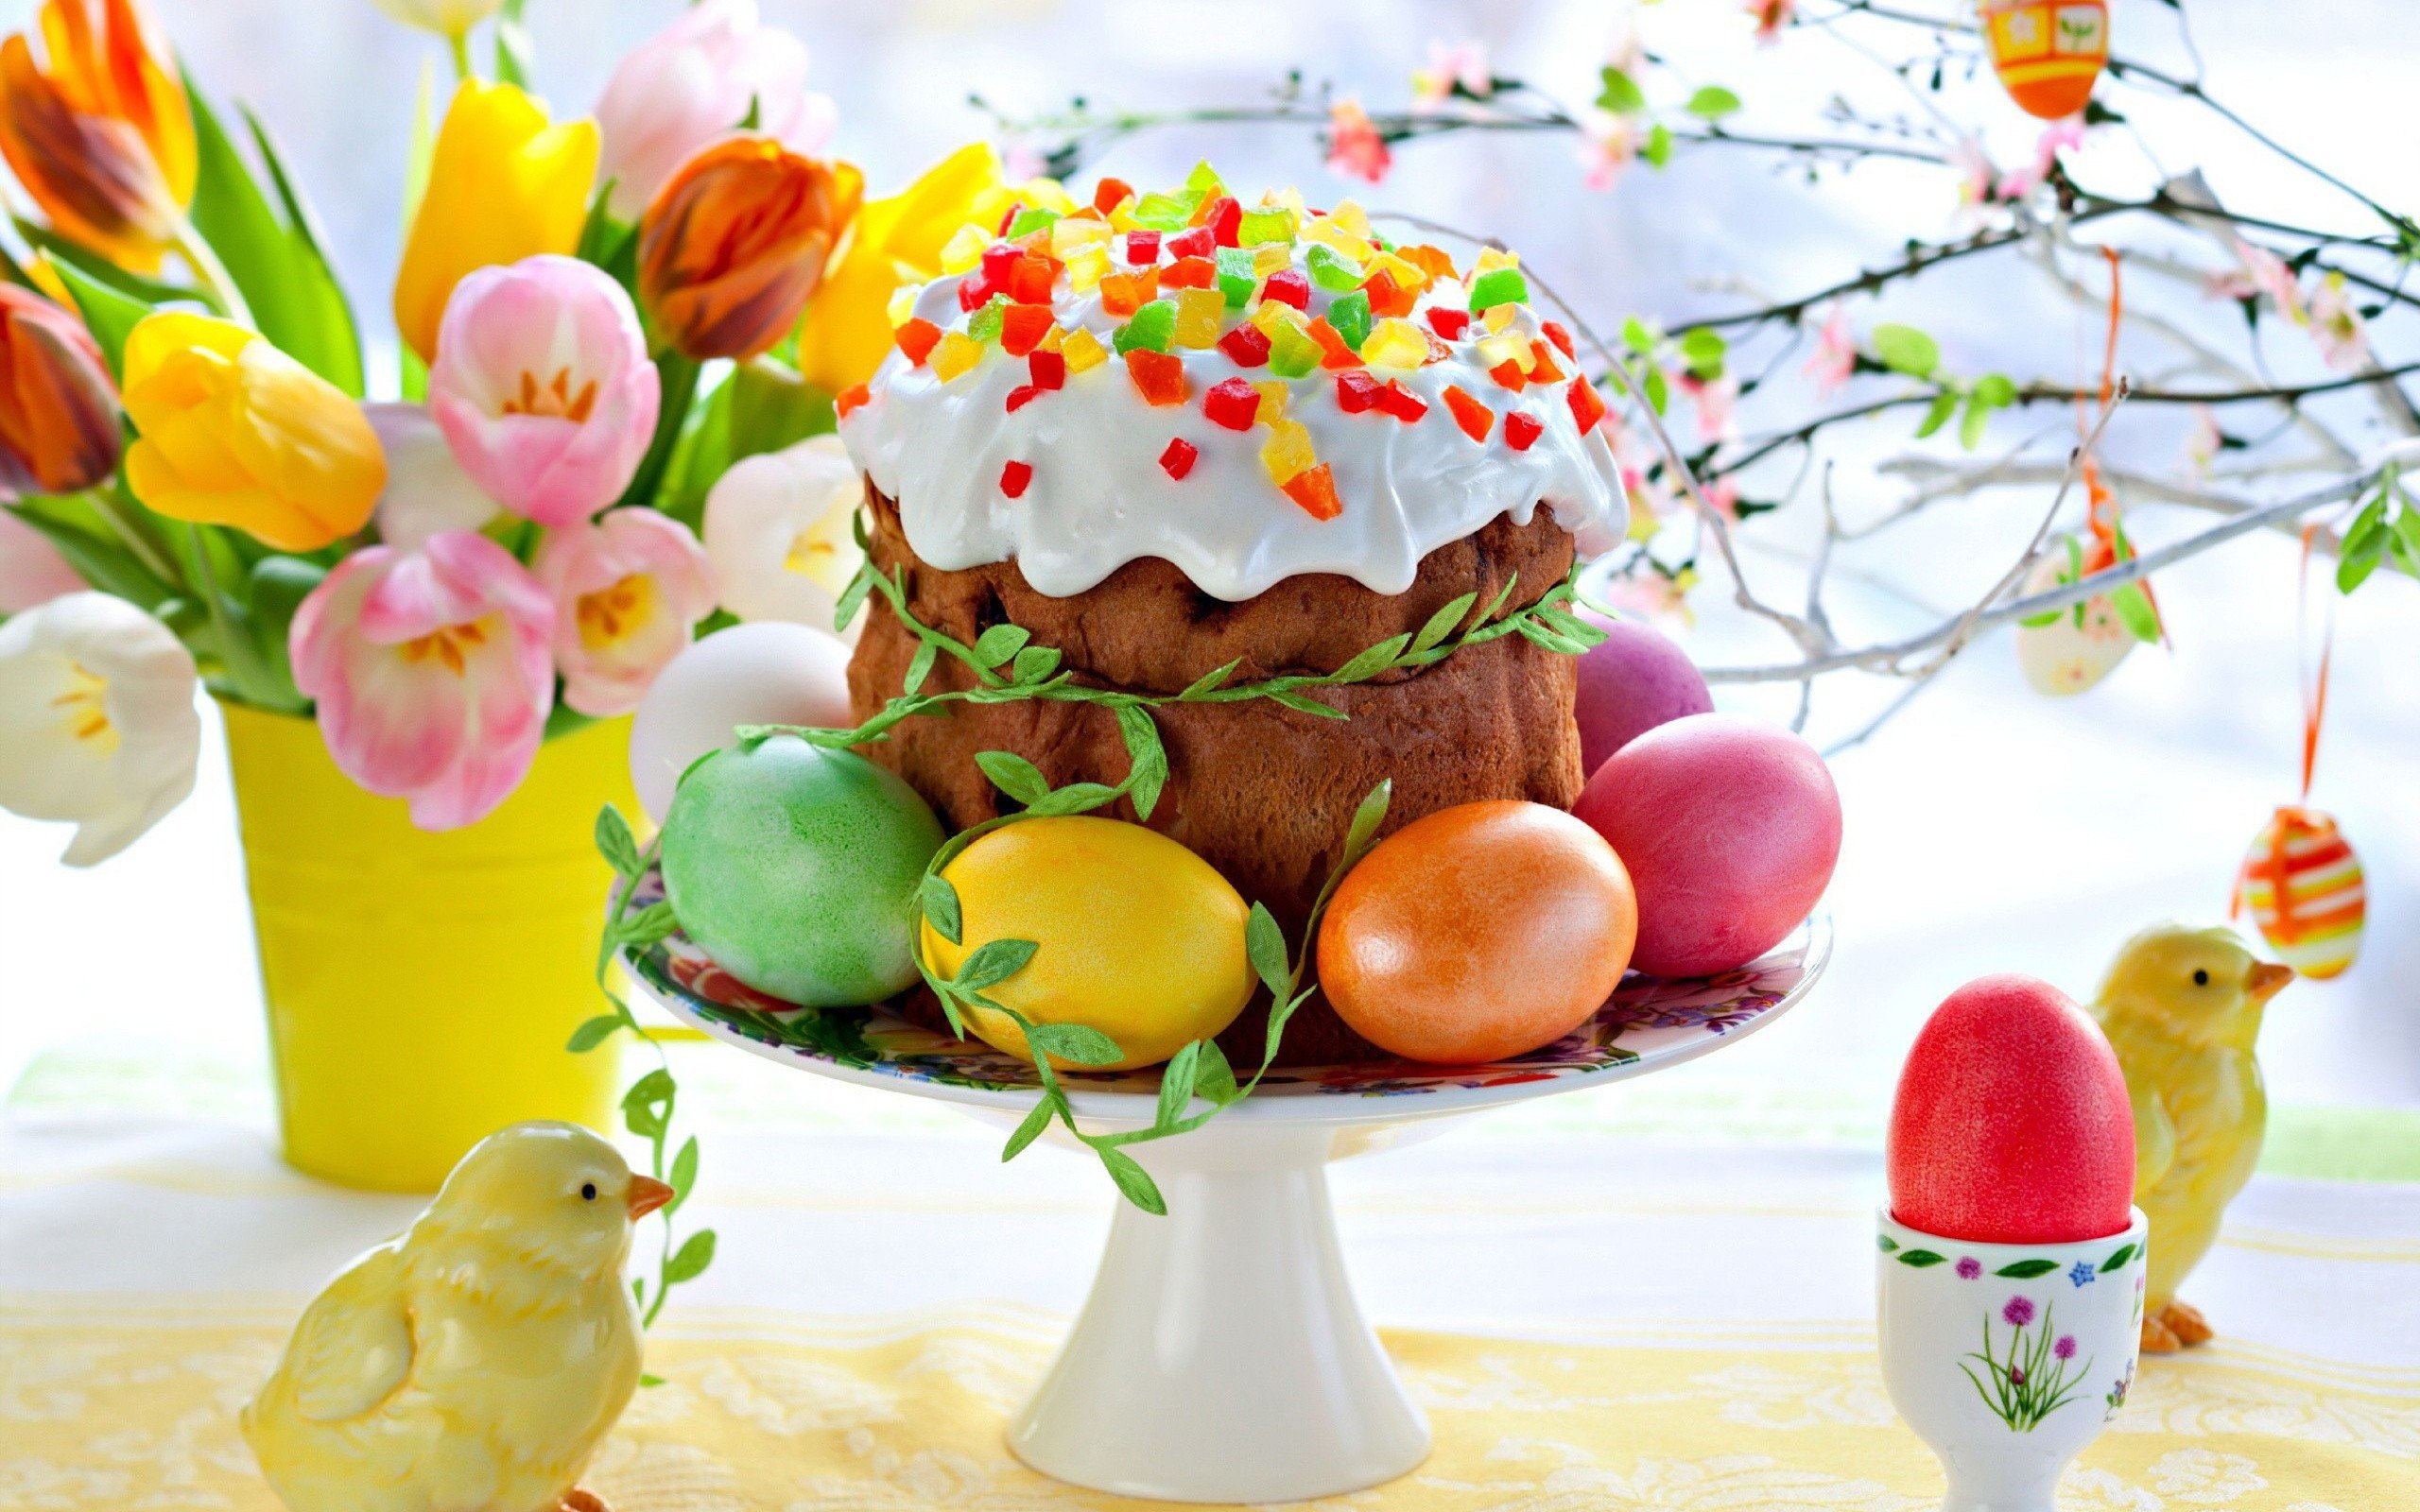 eggs, Tulips, Easter, Easter, Eggs, Cakes, Icing Wallpaper